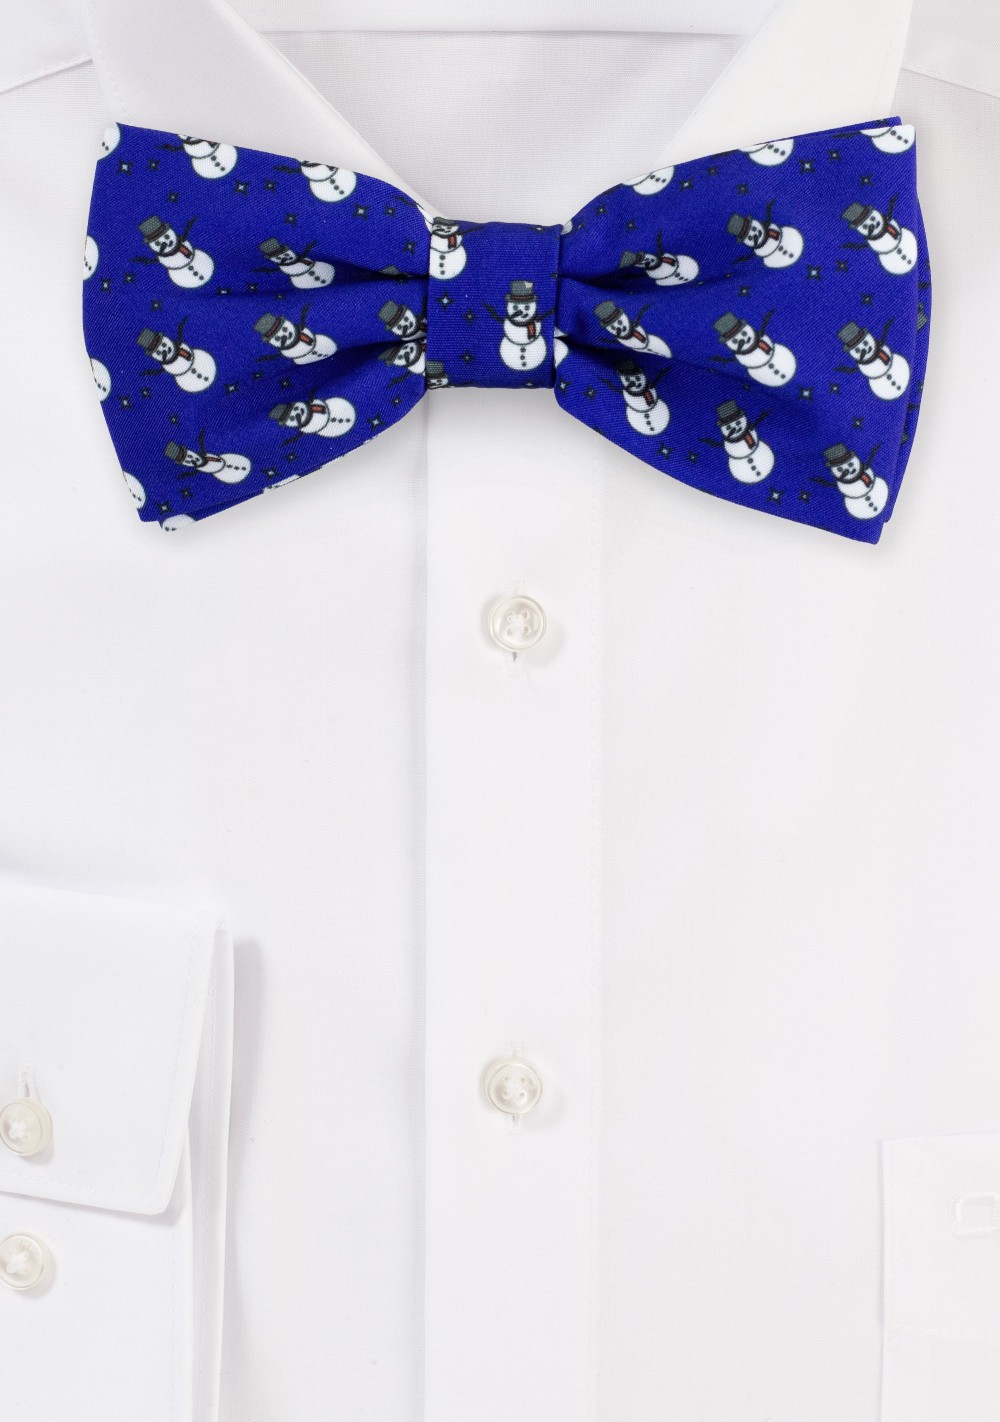 Blue Bow Tie with Snowmen